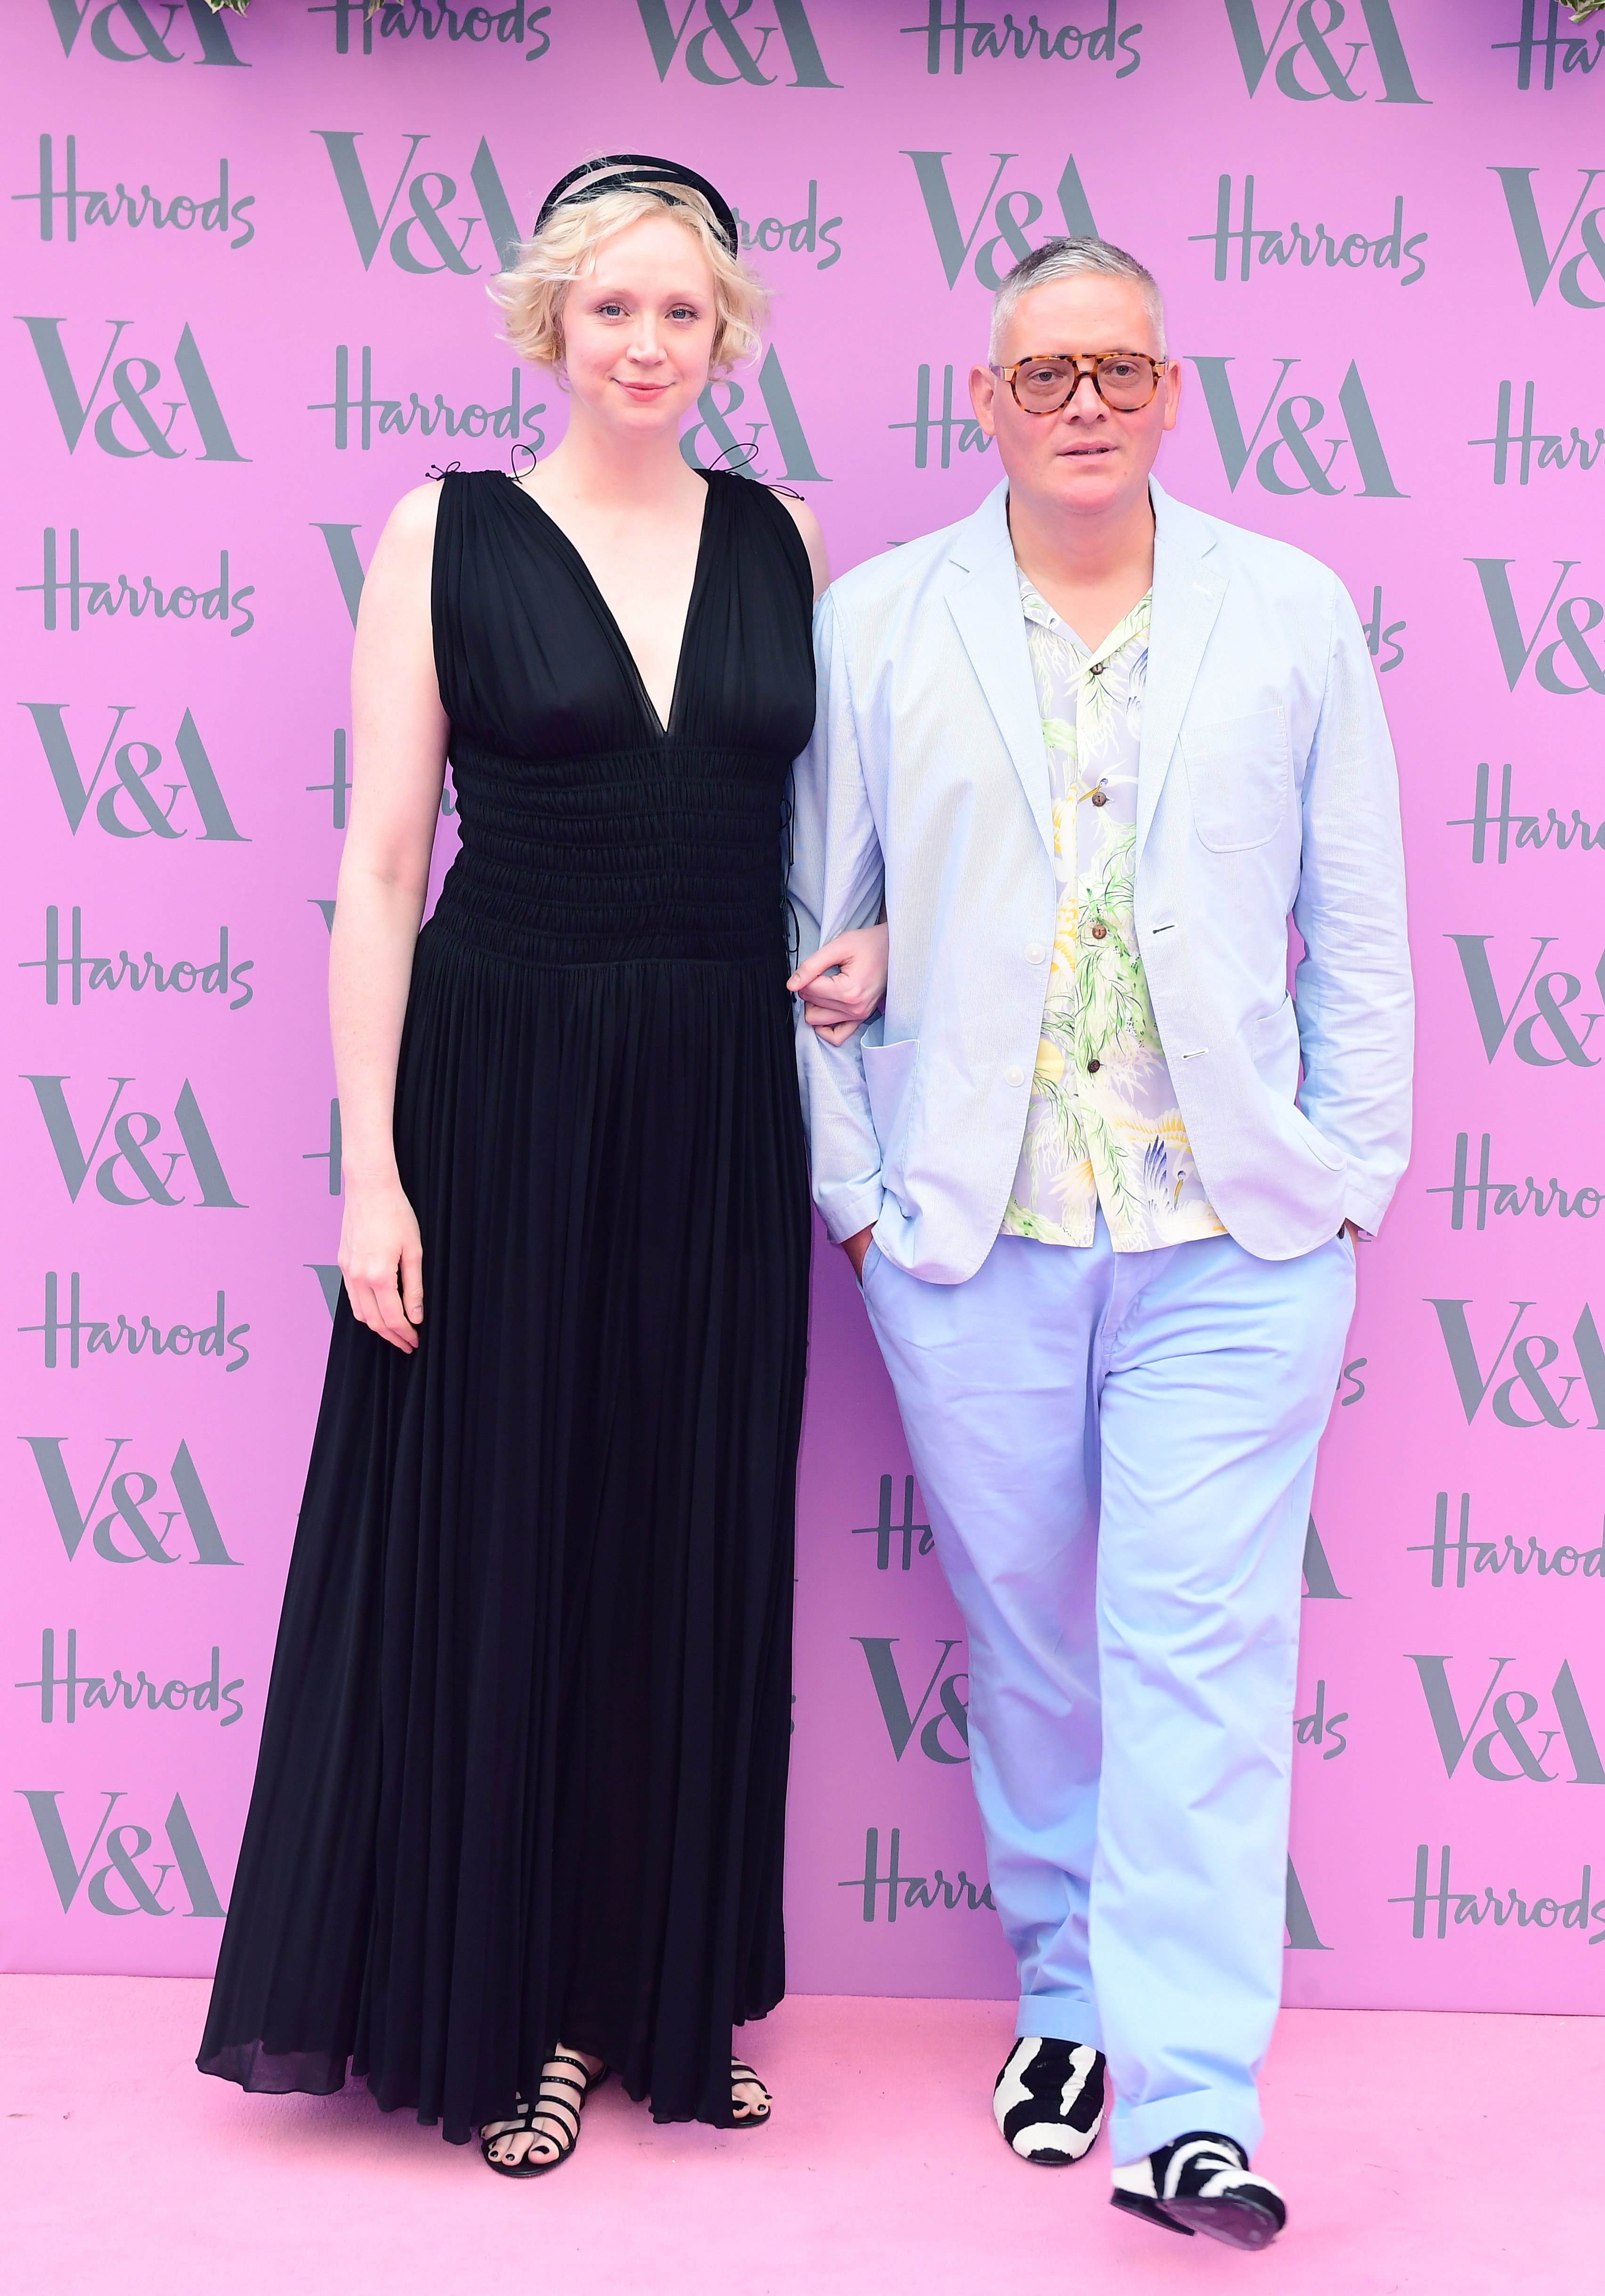 Gwendoline Christie and Giles Deacon at the V&A Summer Party at the V&A Museum in London | Source: Getty Images